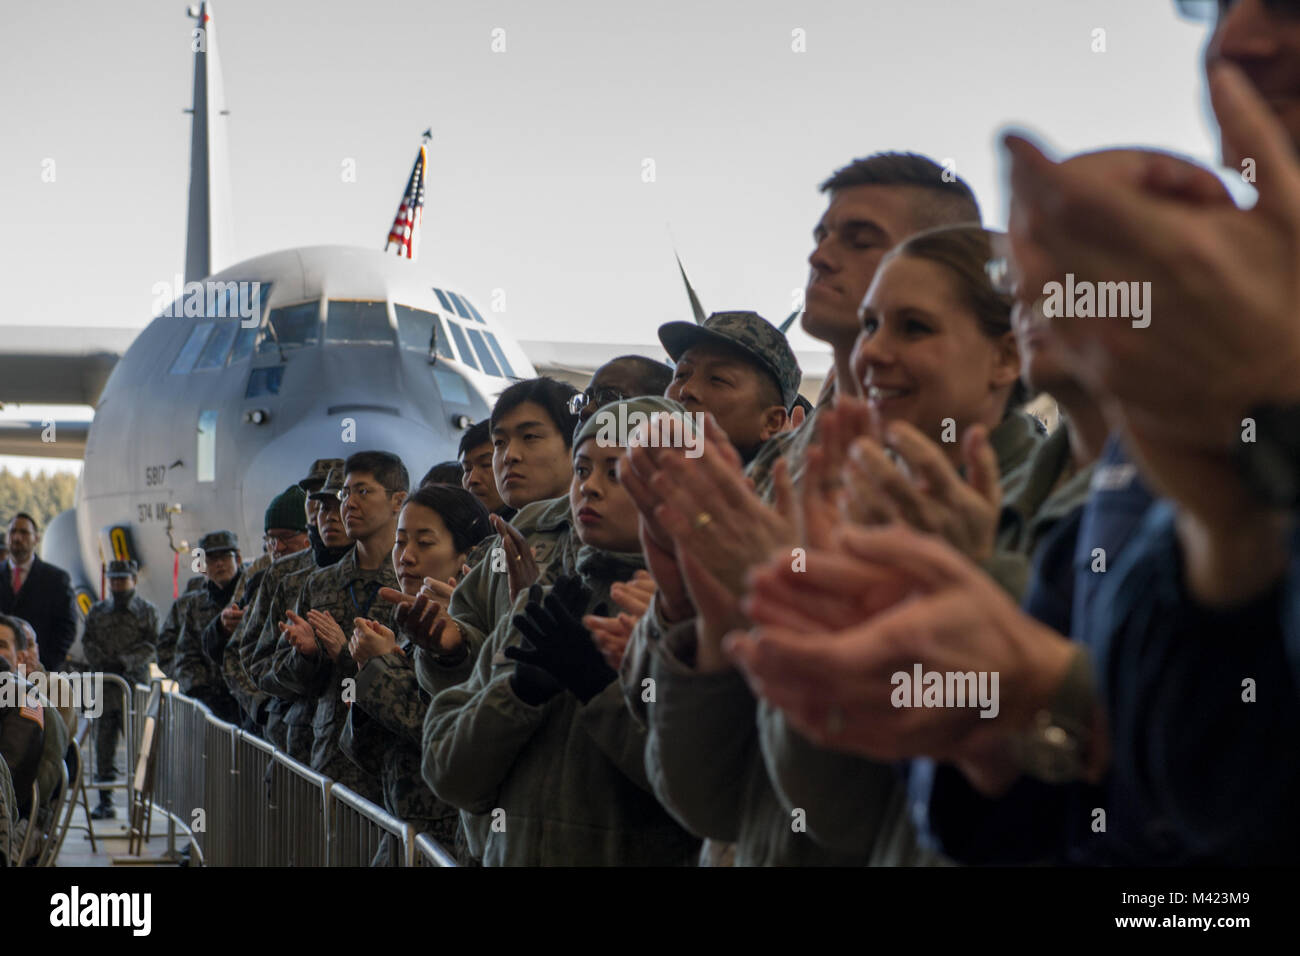 U.S. service members and Japan Air Self-Defense Force members applaud Vice President Michael Pence during his troop talk, Feb. 8, 2018, at Yokota Air Base, Japan. During the speech Pence spoke to the importance of a strong Japanese-U.S. relationship to help ensure stability in the Indo-Asia Pacific region. (U.S. Air Force photo by Senior Airman Donald Hudson) Stock Photo